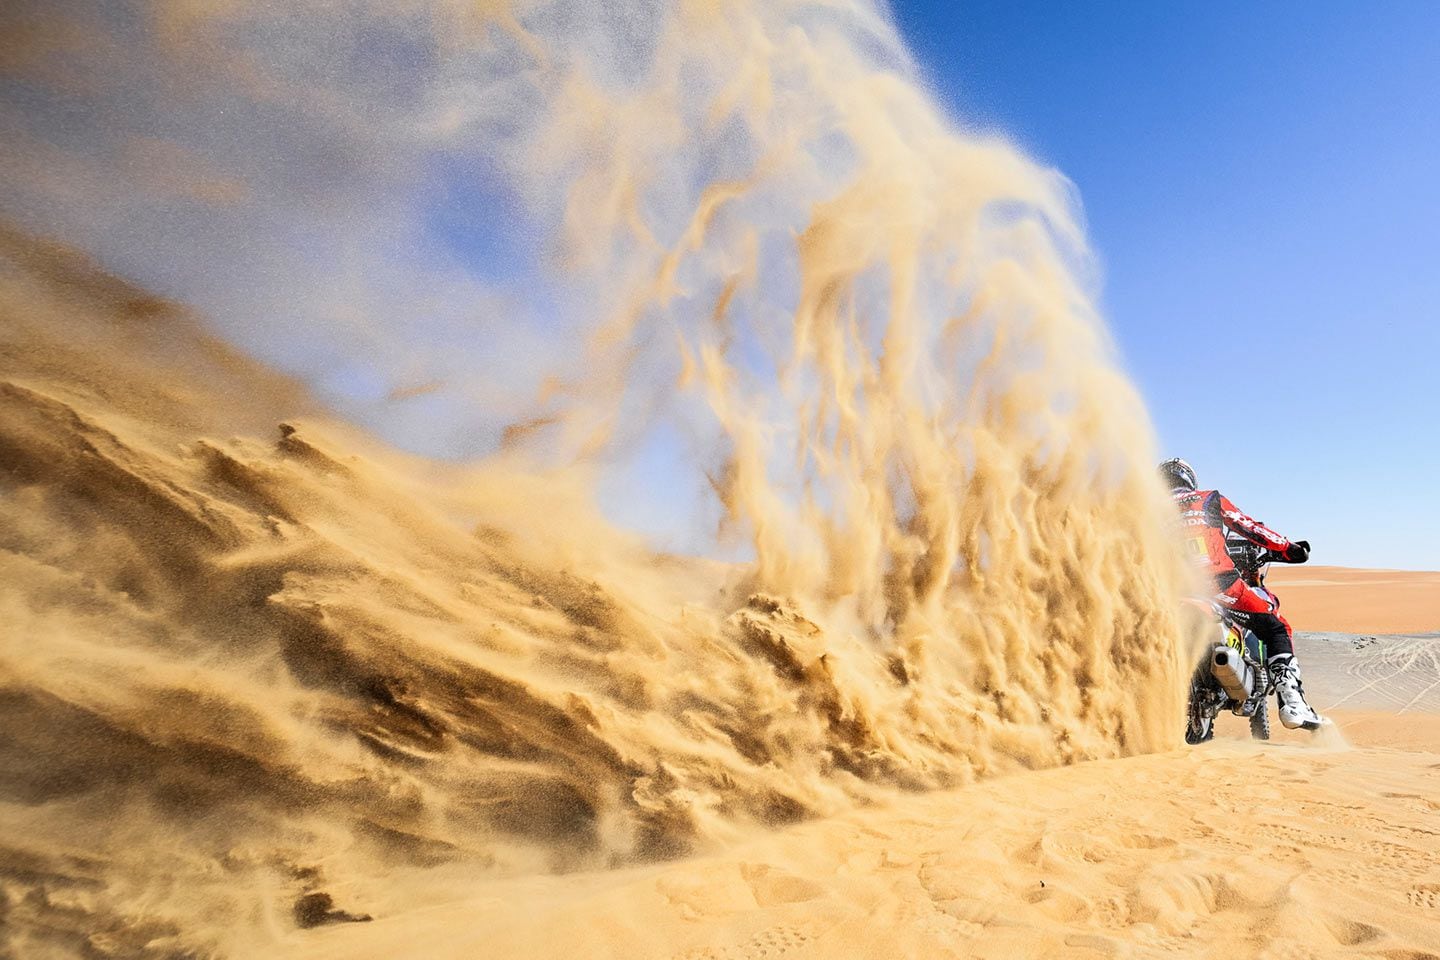 Creating rooster tails of sand is Skyler “Mustache Man” Howes on the Monster Energy Honda Team Honda during Stage 5.